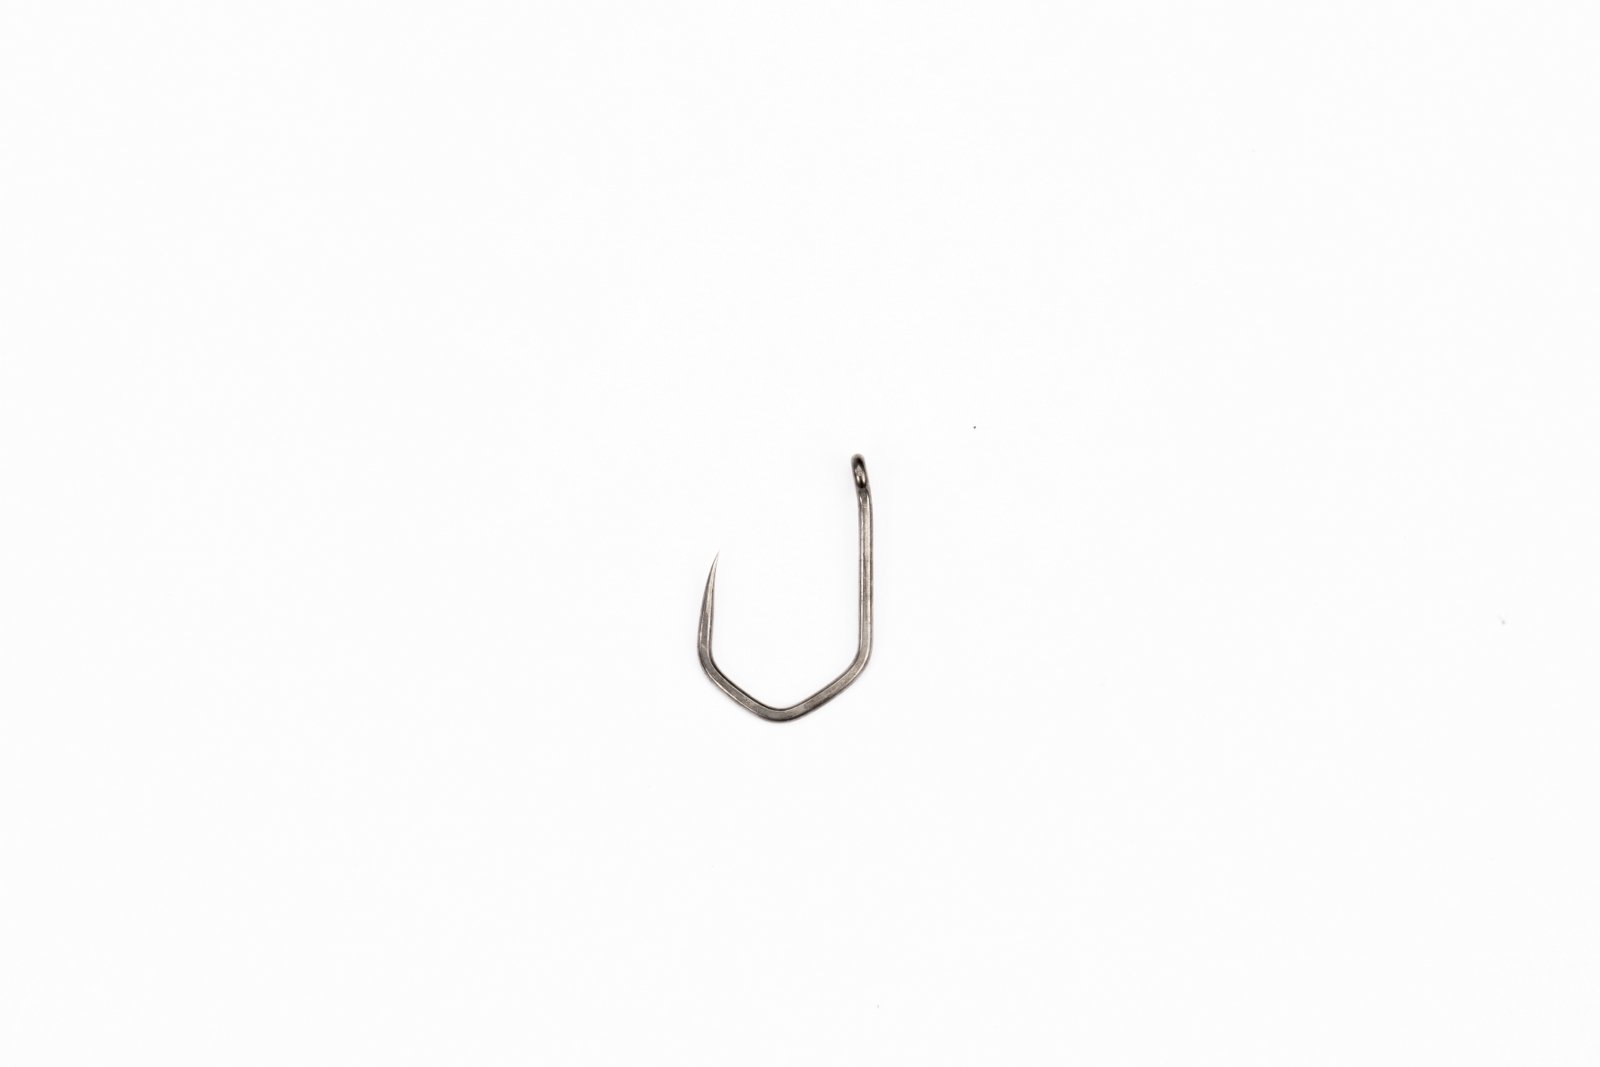 Nash Claw Size 7 Micro Barbed Hooks & Sharpening Tackle T6136 International Shop Europe